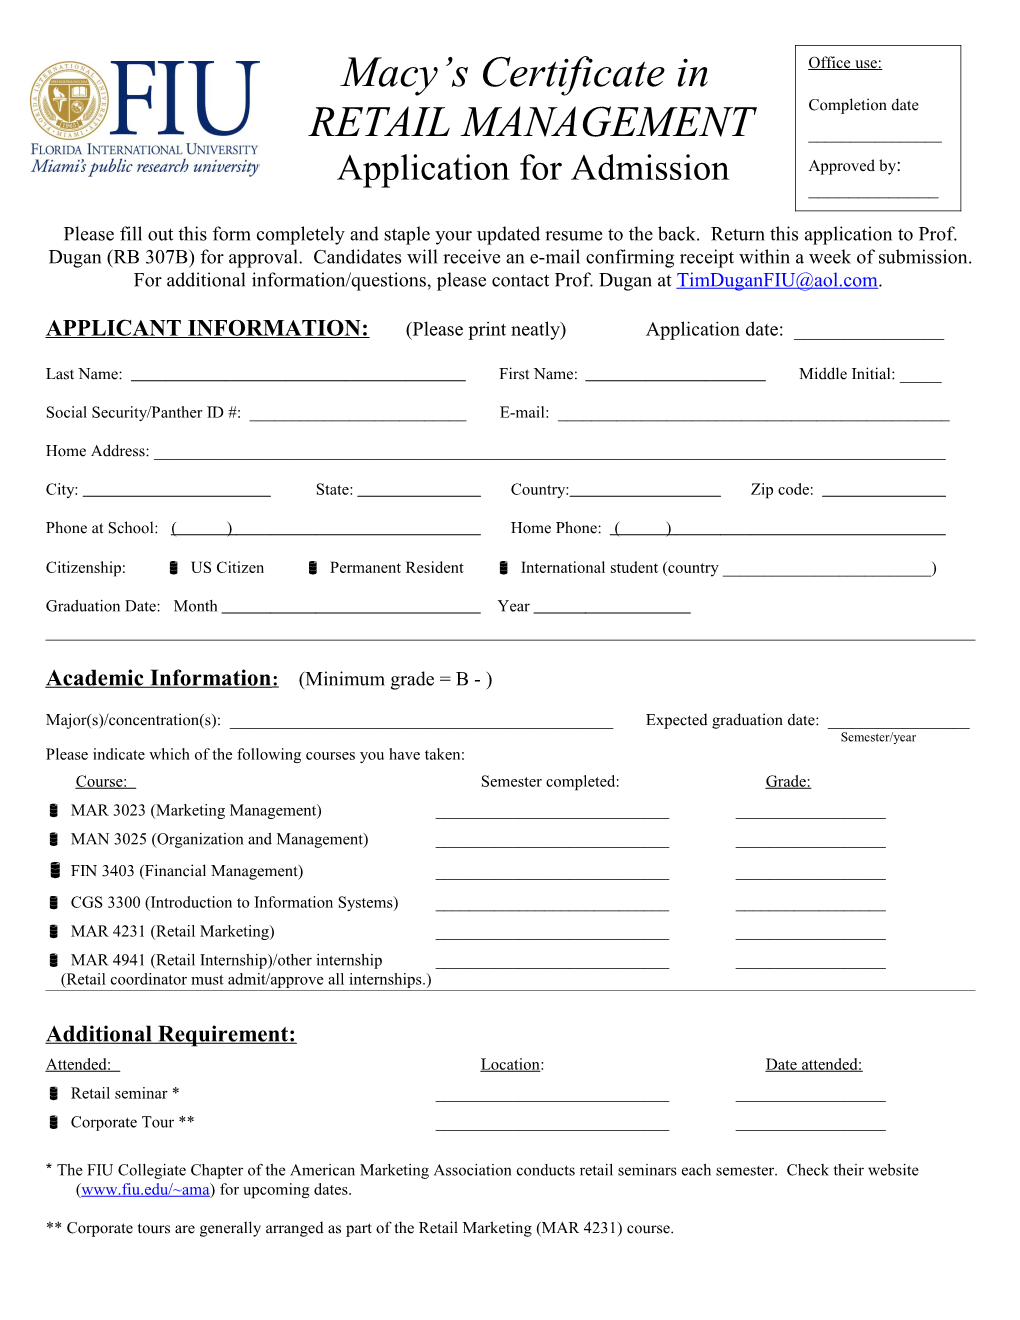 APPLICANT INFORMATION: (Please Print Neatly) Application Date: ______